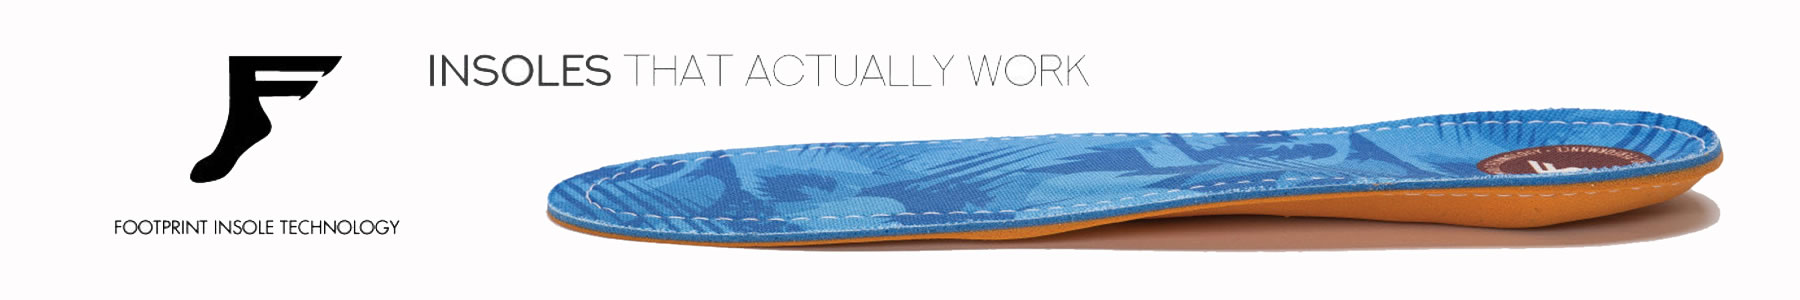 Insoles-That-Actually-Work